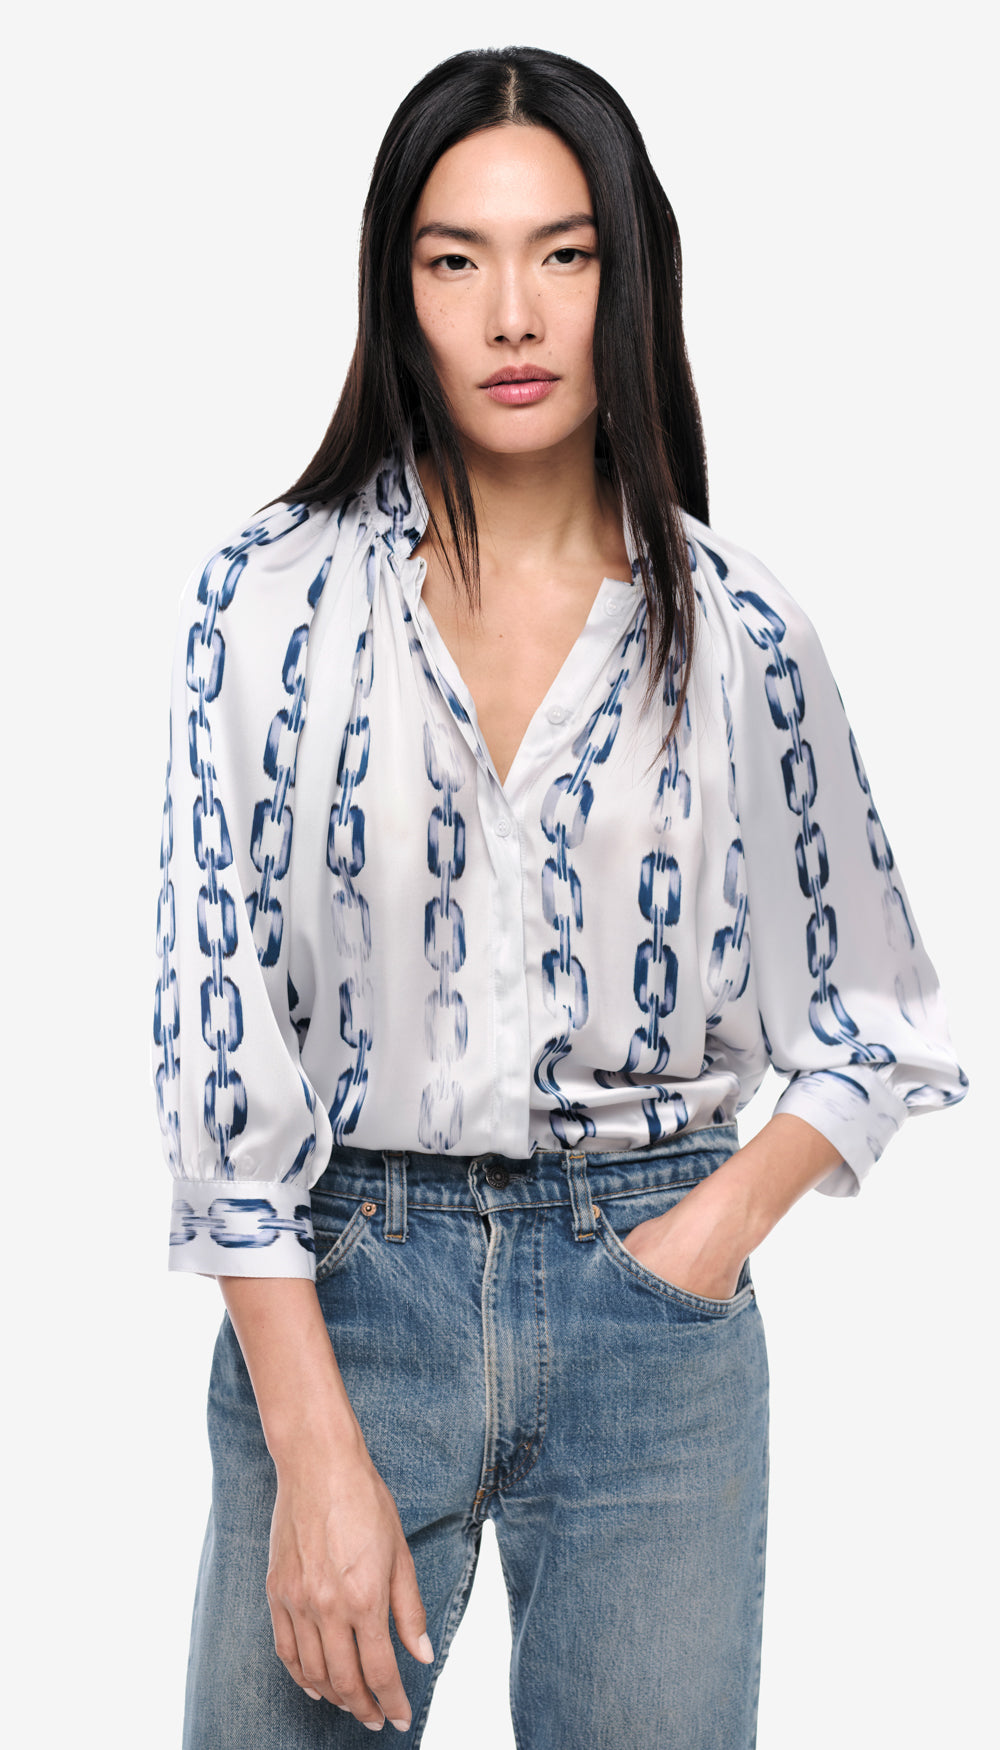 A woman in a white and blue printed blouse.